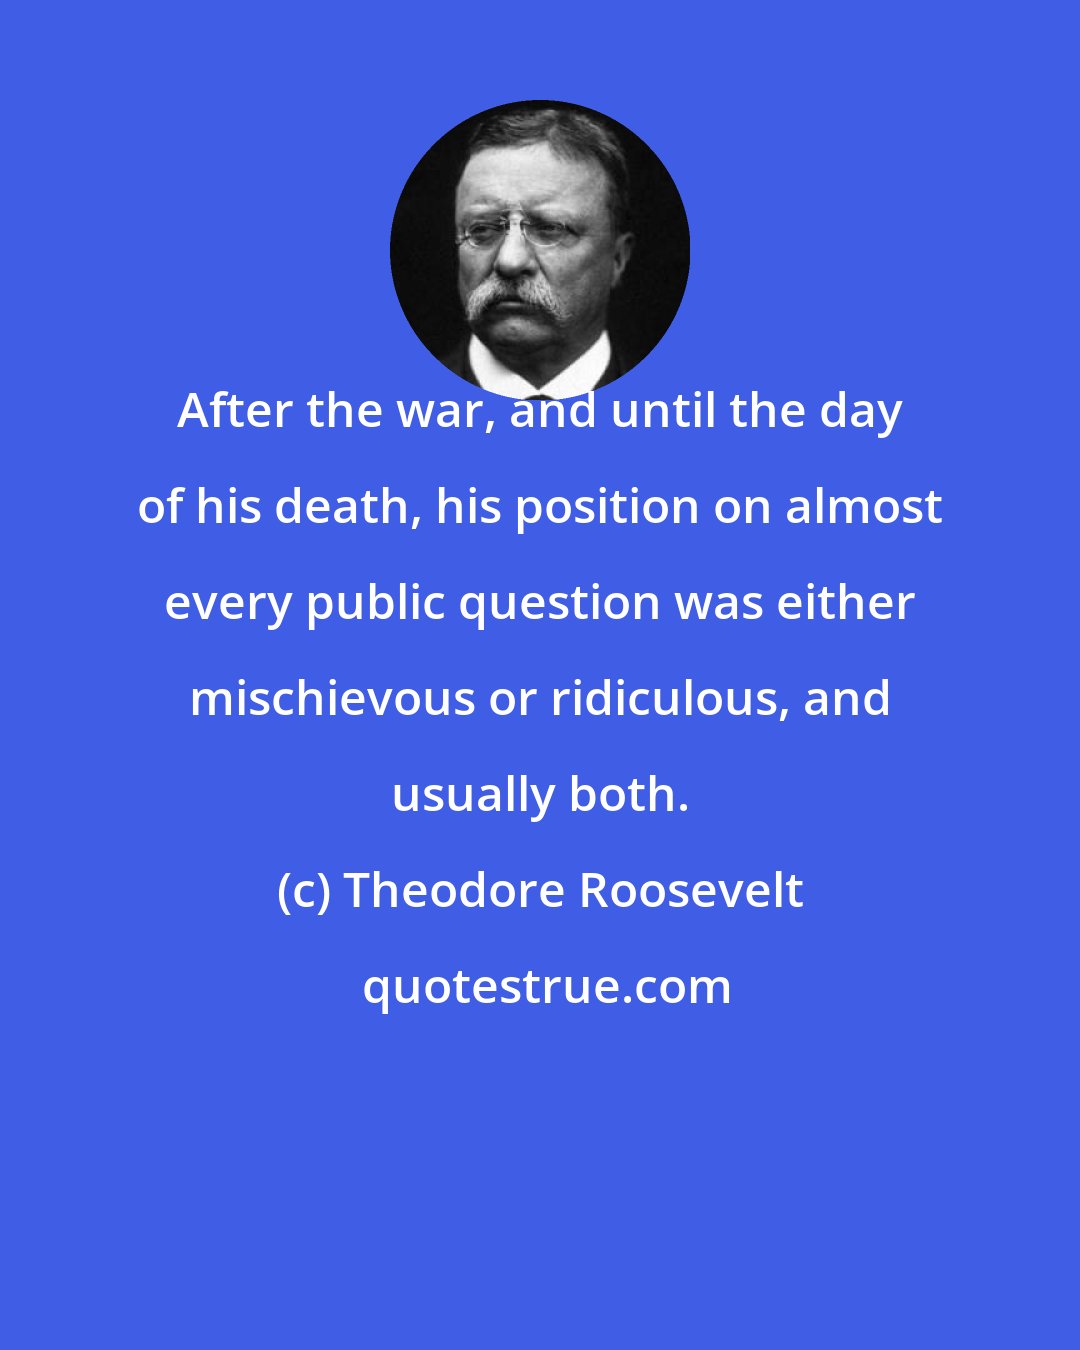 Theodore Roosevelt: After the war, and until the day of his death, his position on almost every public question was either mischievous or ridiculous, and usually both.